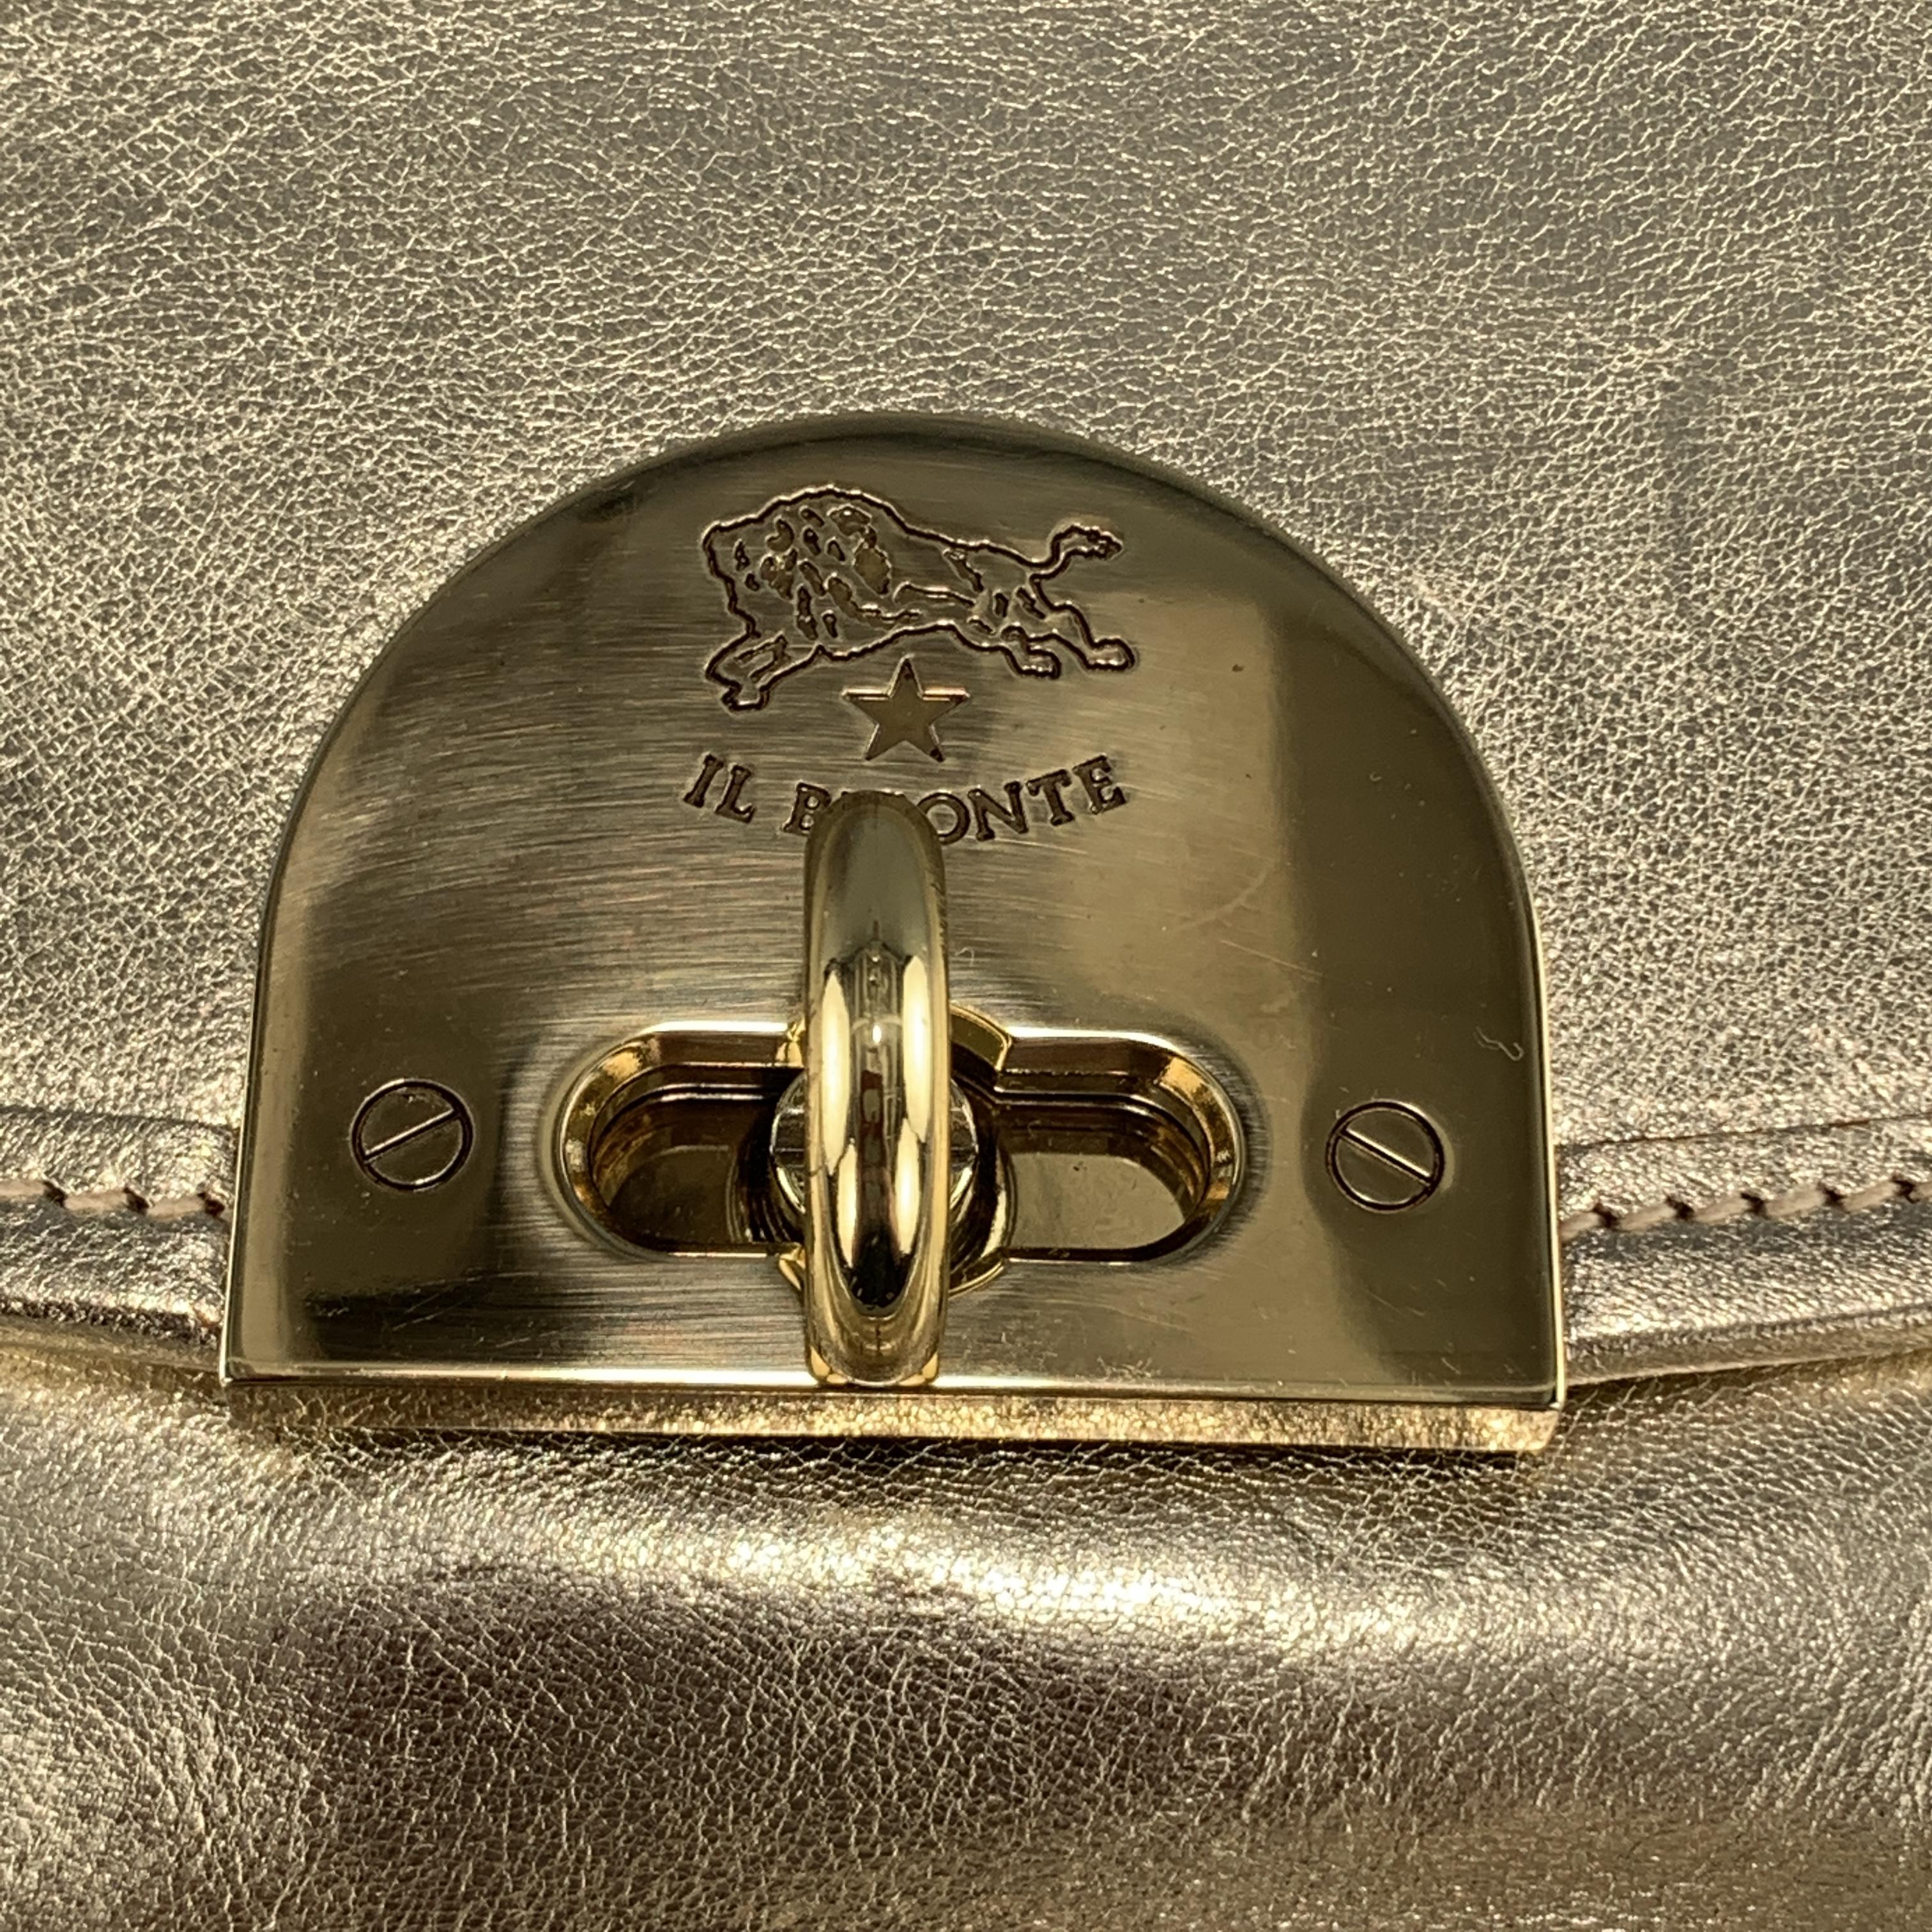 IL BISONTE mini bag comes in Platino champagne metallic gold leather with a flap turnlock closure. Wear it as a cross body or belt bag with different loops. Made in Italy.

New with Tags. 

Measurements:

Length: 6 in.
Width: 2.25 in.
Height: 5 in. 